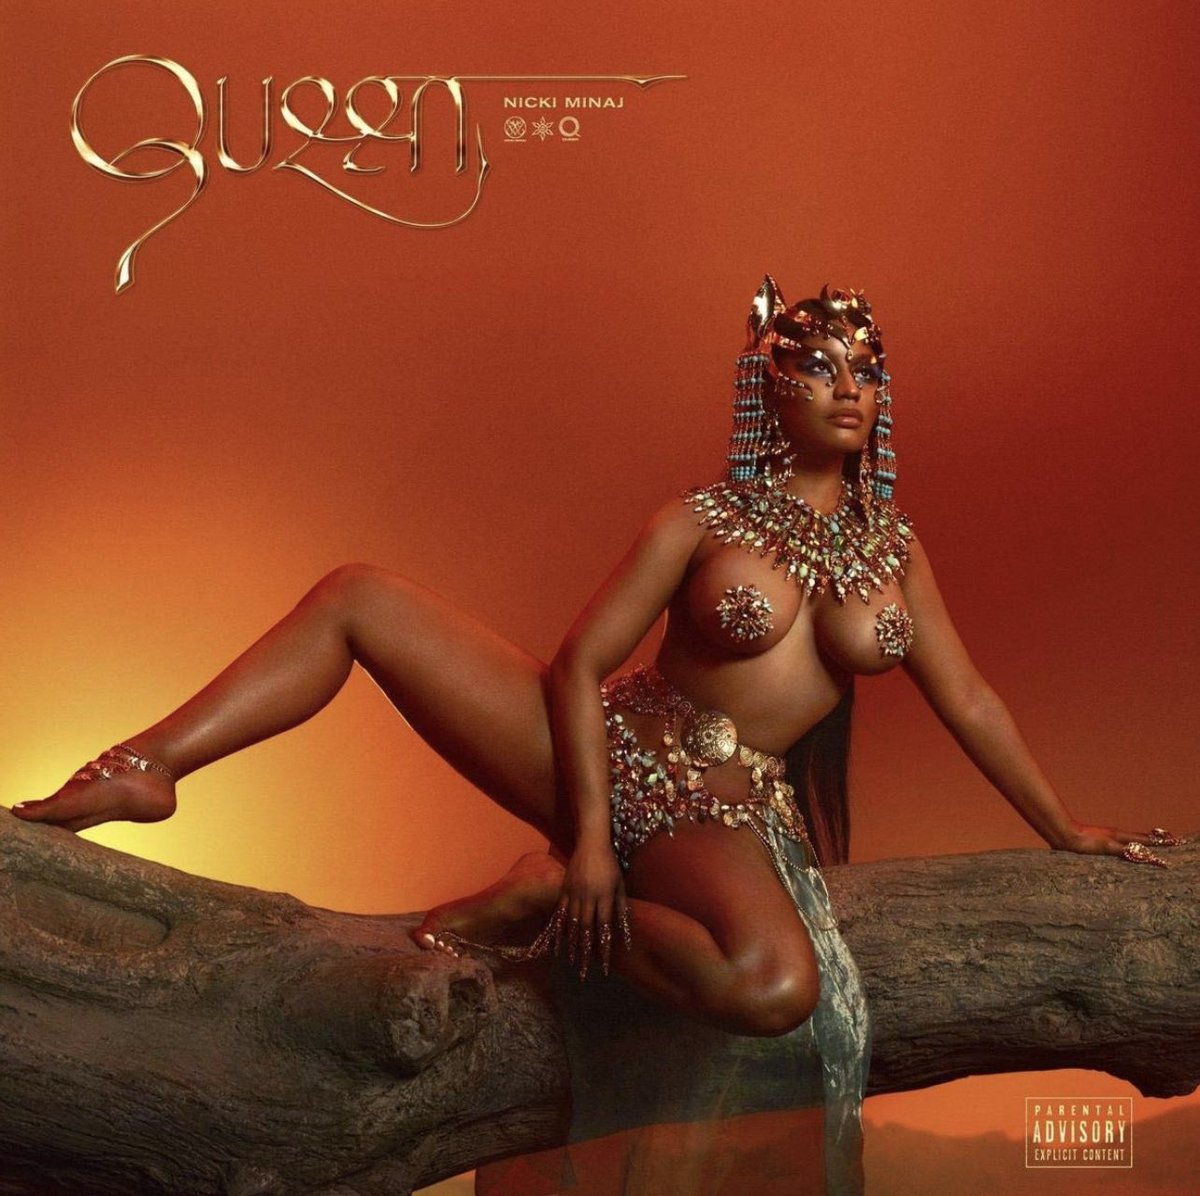 Day #3: Favorite Album by Onika  @NICKIMINAJ  #NickiMinaj    #Barbz    #PinkFriday    #PinkFriday10    #PinkFridayAnniversary   USE THIS TWEET AND COMMENT DOWN BELOW OR QUOTE YOUR FAVORITE ALBUM! USE  #Day3NickiMinaj 